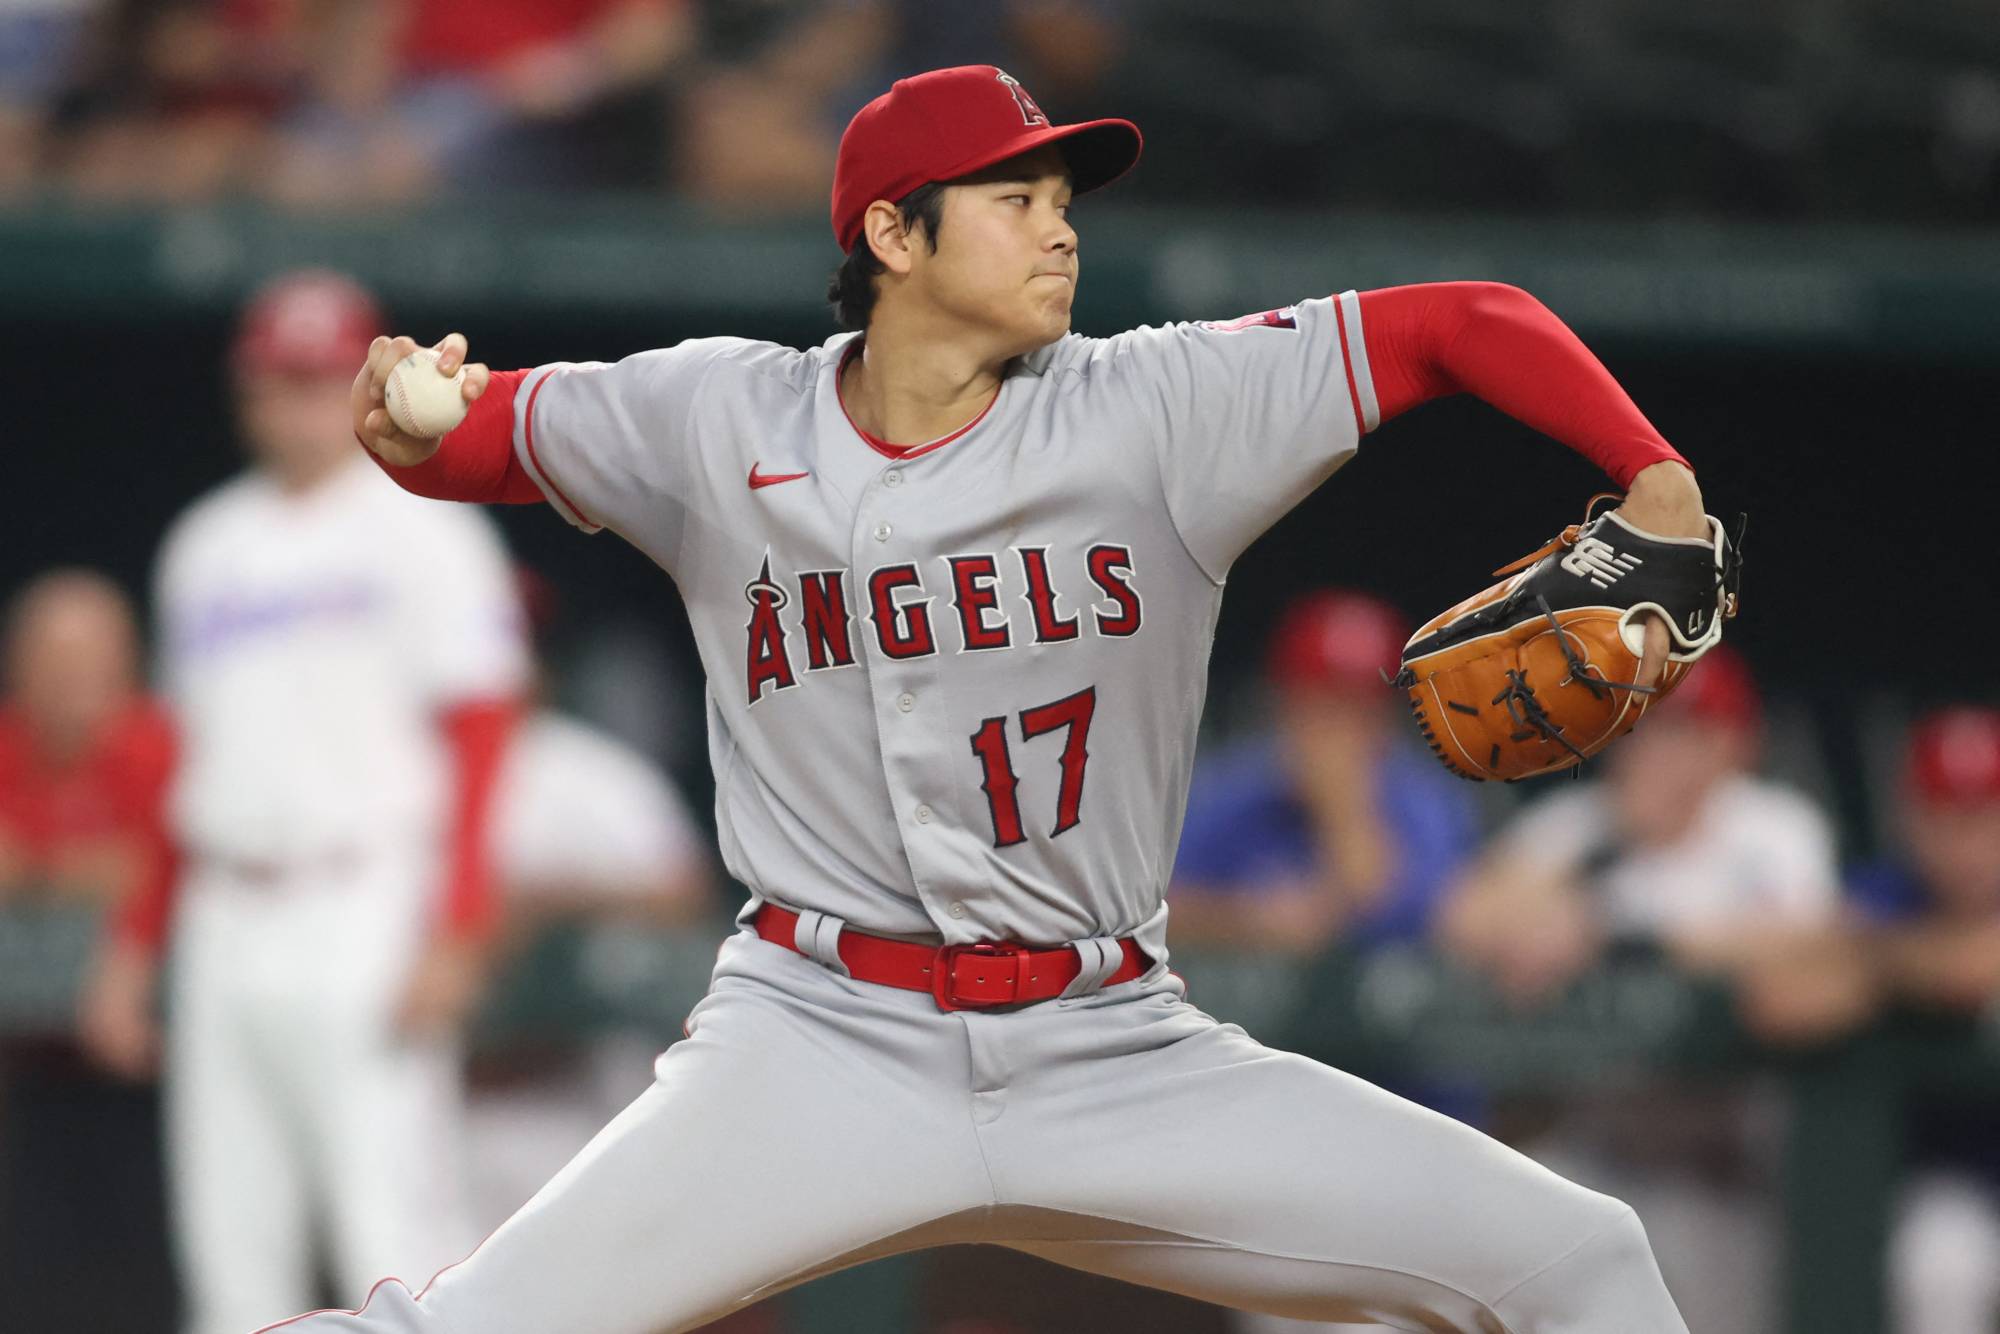 Shohei Ohtani 1st All-Star picked as pitcher and hitter – The